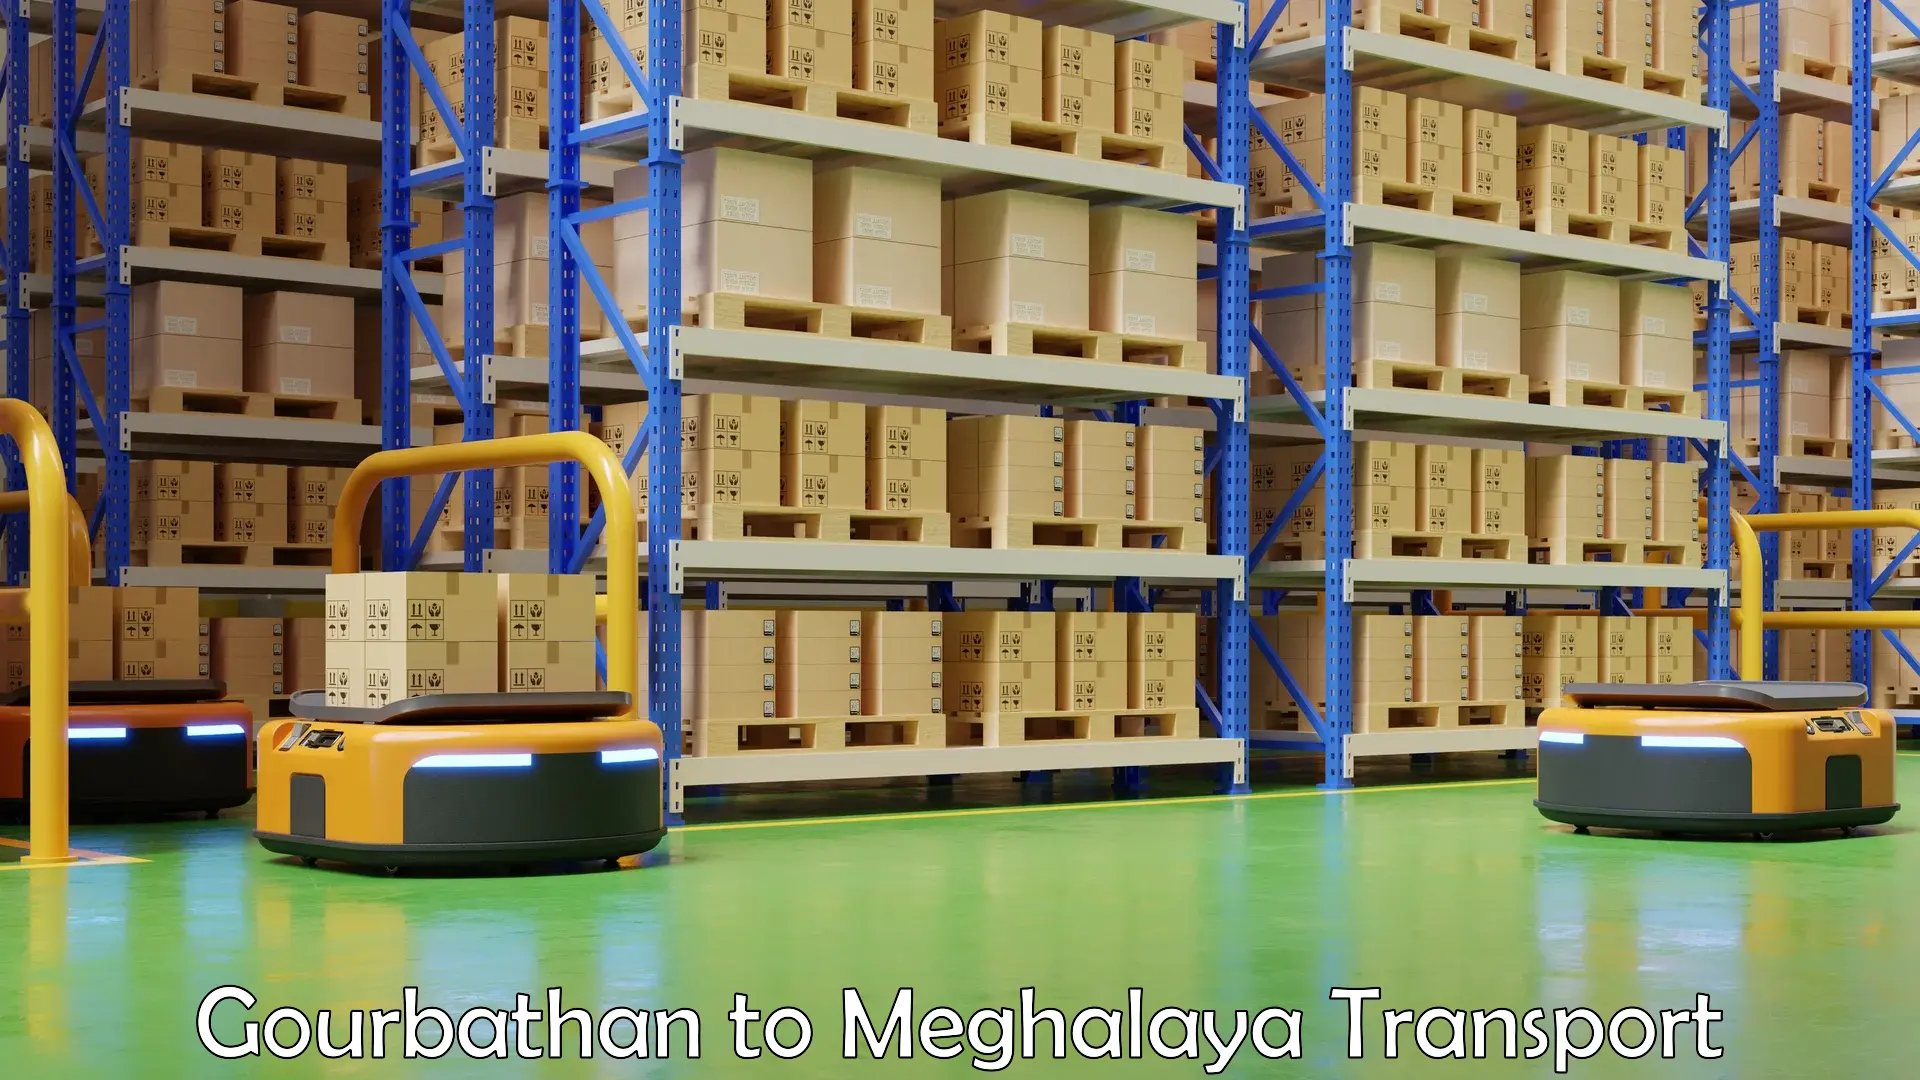 Goods delivery service Gourbathan to Meghalaya